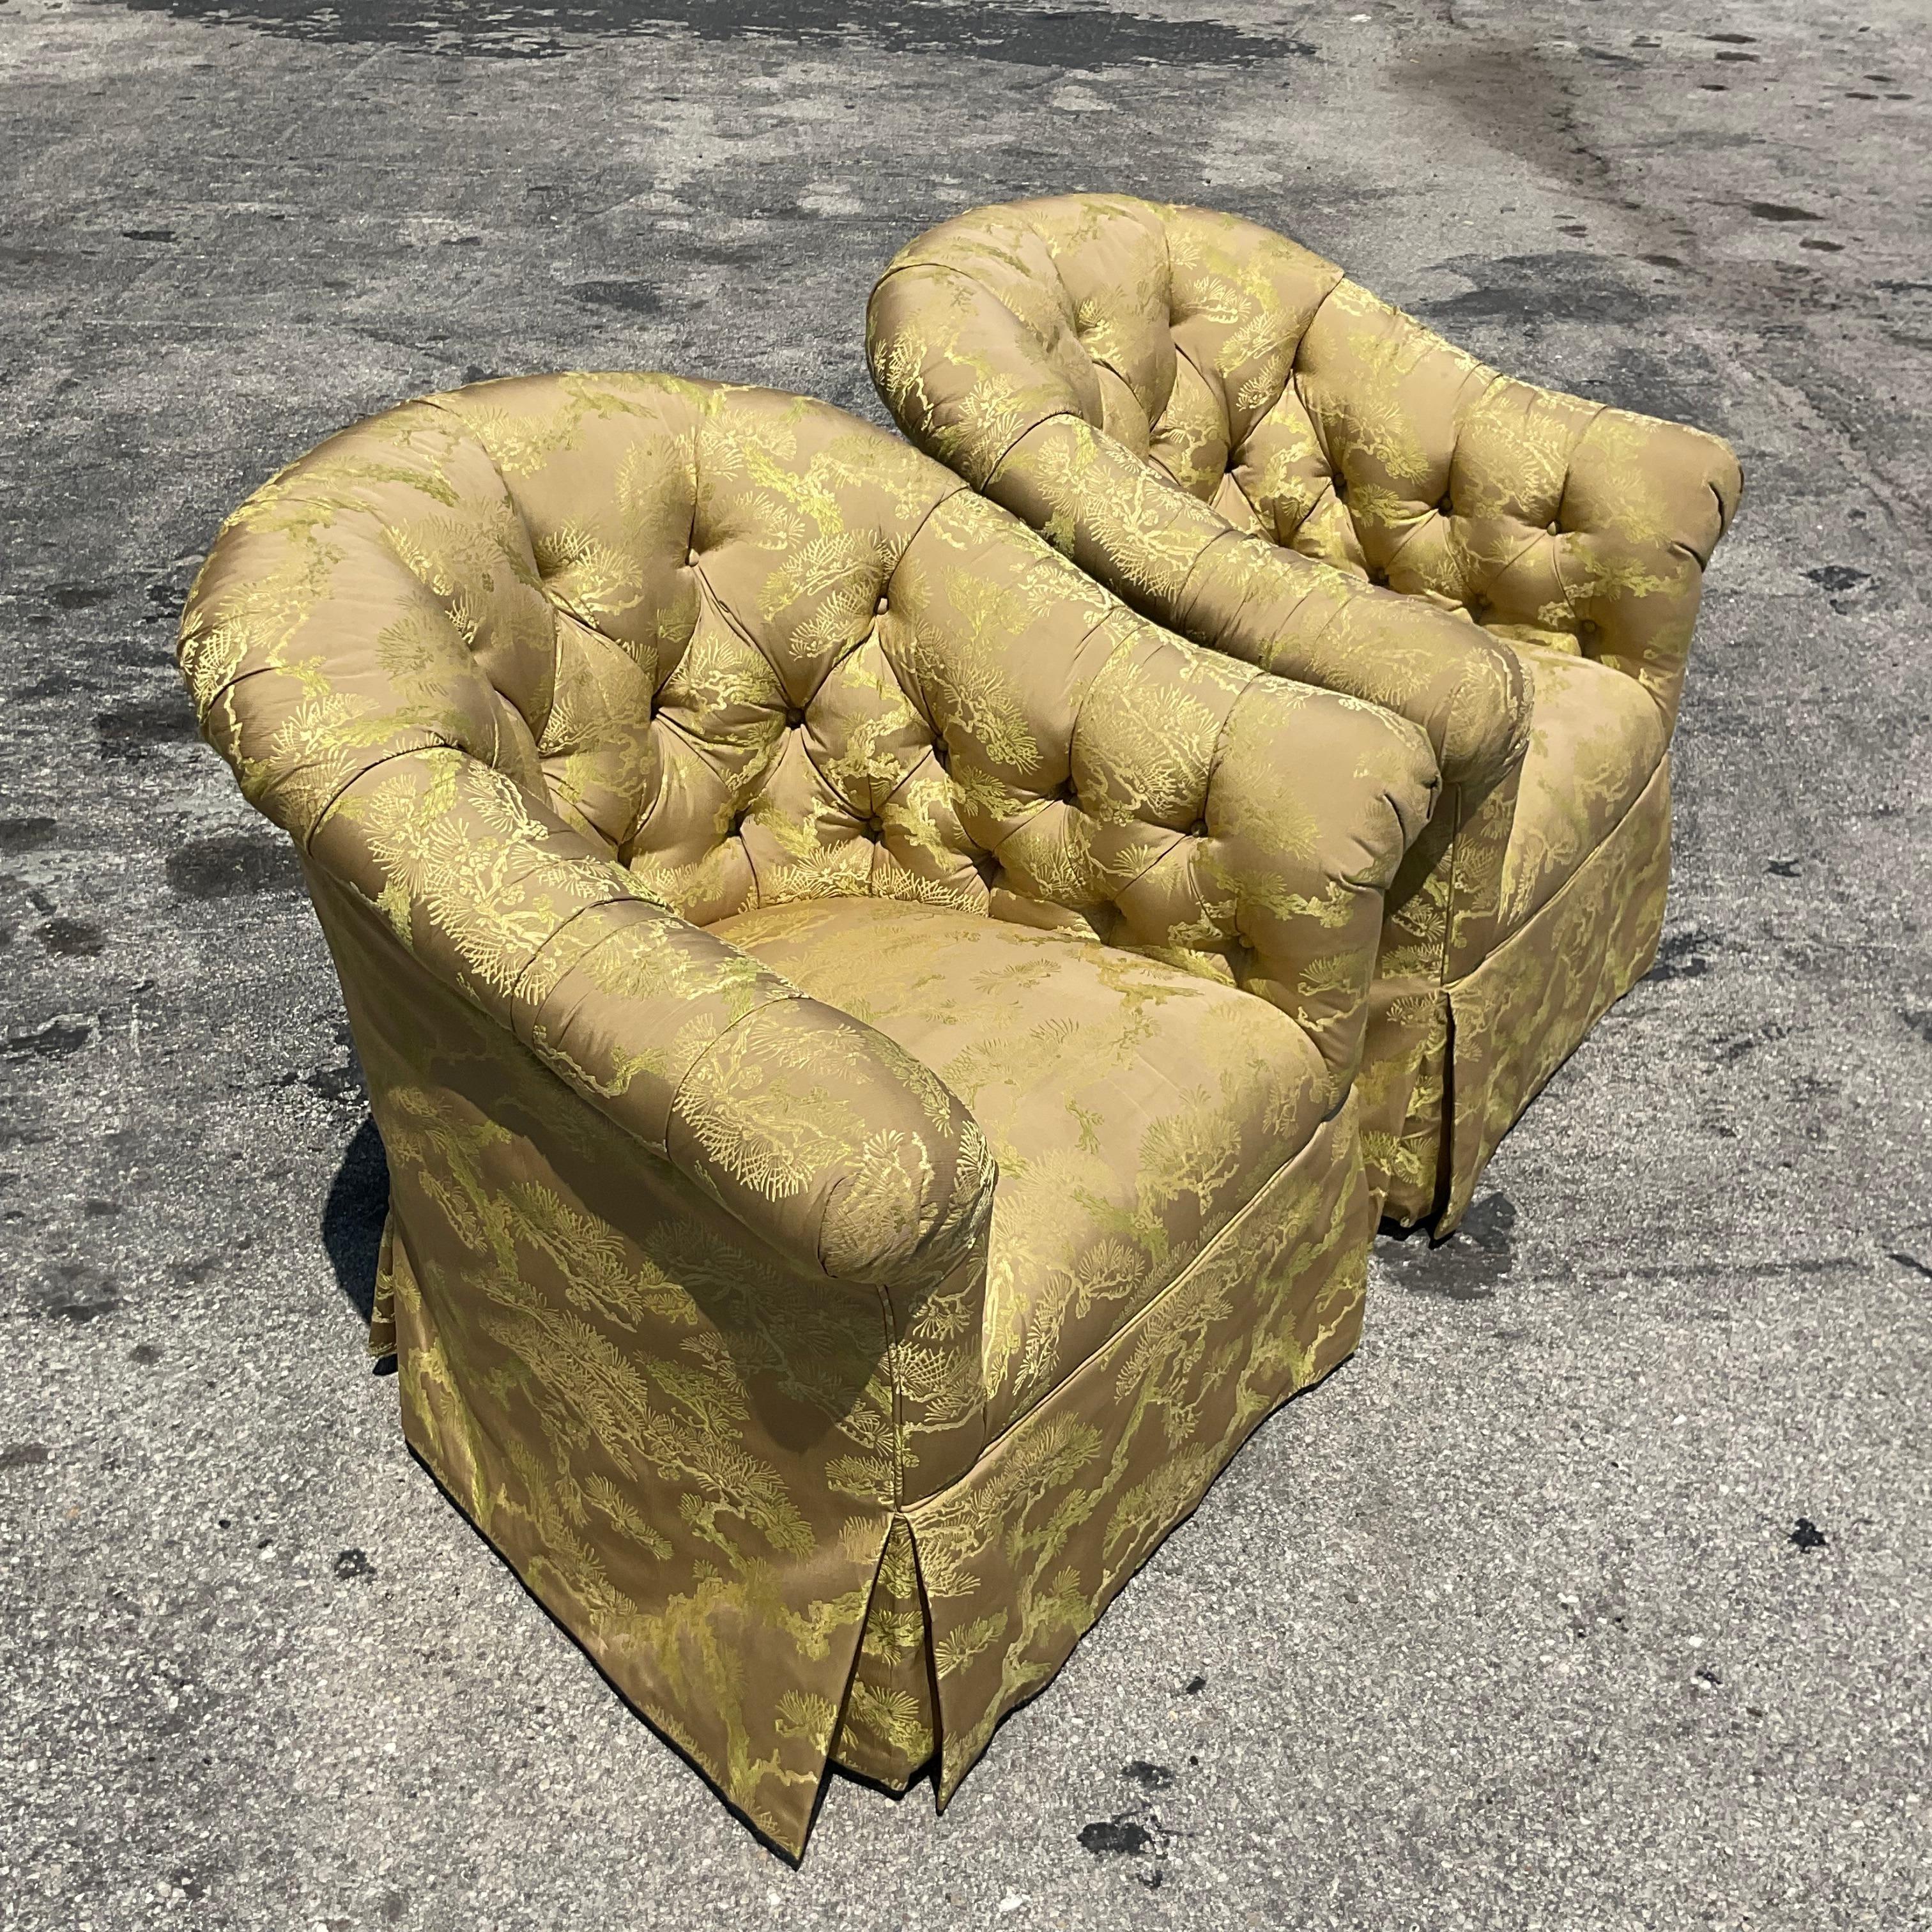 An extraordinary pair of vintage Regency swivel chairs. Chic silk chinoiserie in a brilliant Chartreuse green. Tufted interior and high back makes these chairs a glamorous addition to any space. Acquired from a Palm Beach estate.